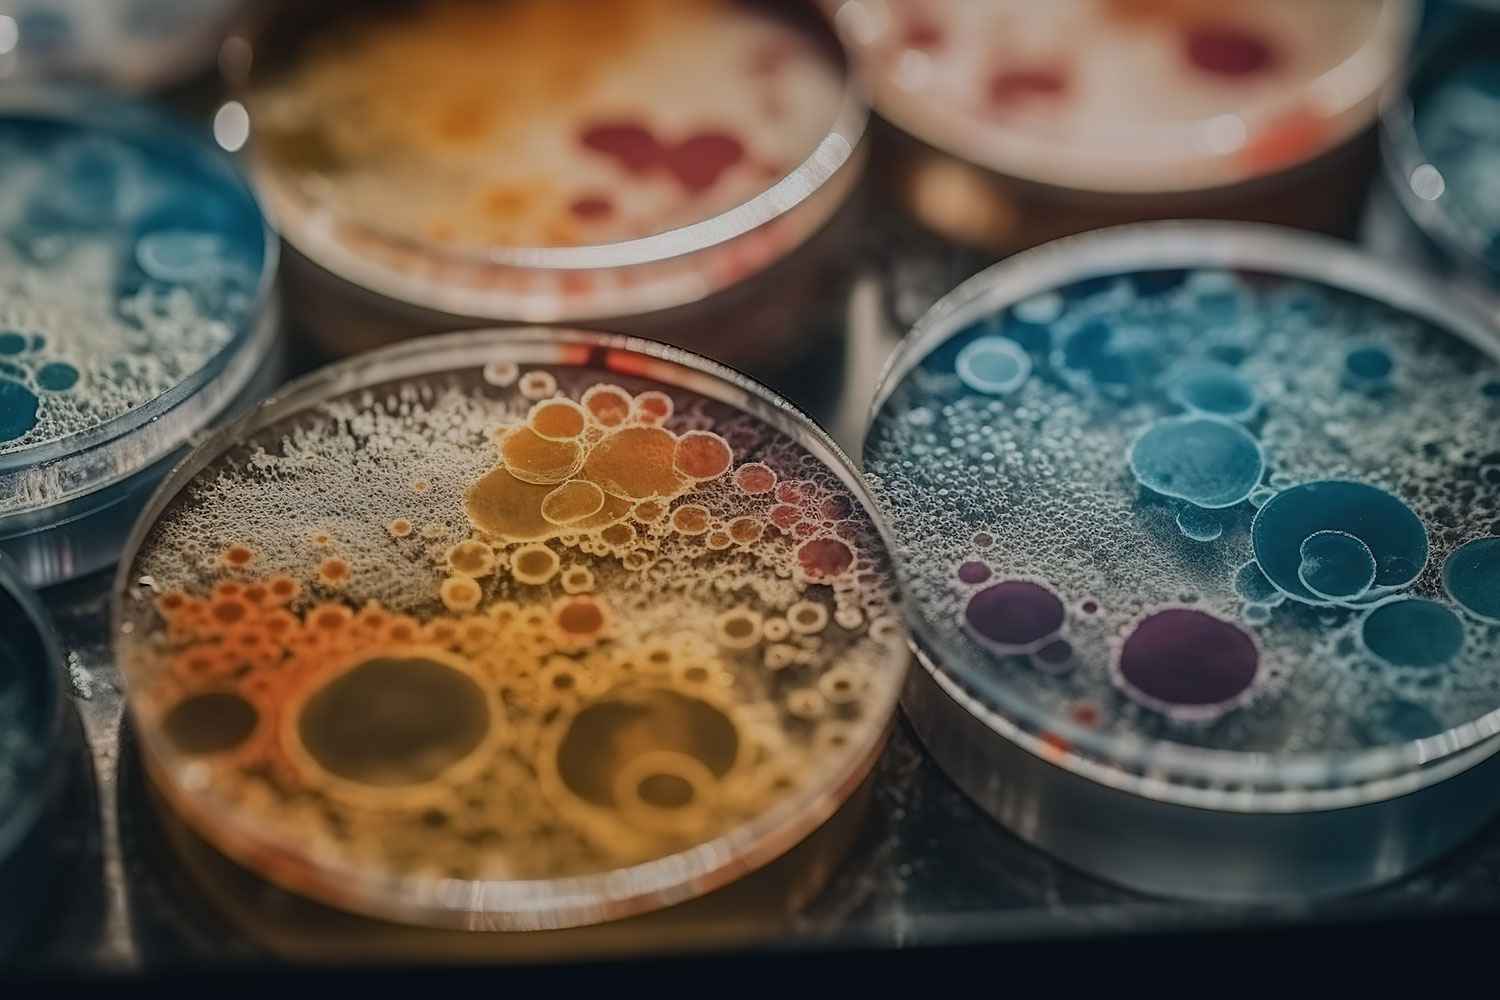 Several petri dishes showing growing bacterial cultures